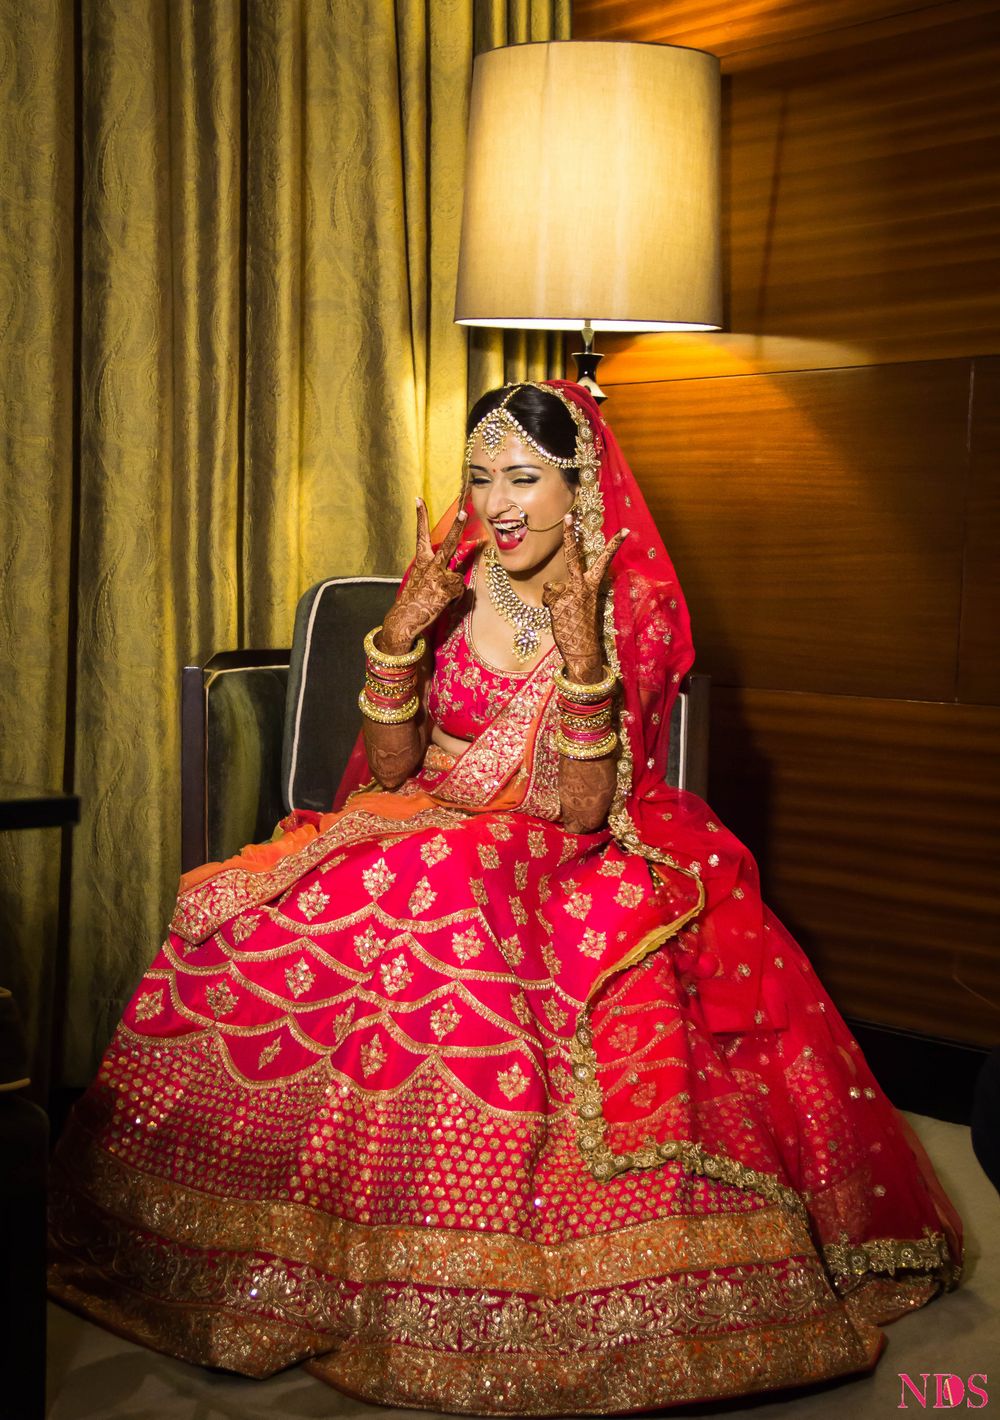 Photo of Fun Bridal Portrait with Bride in Hot Pink Lehenga